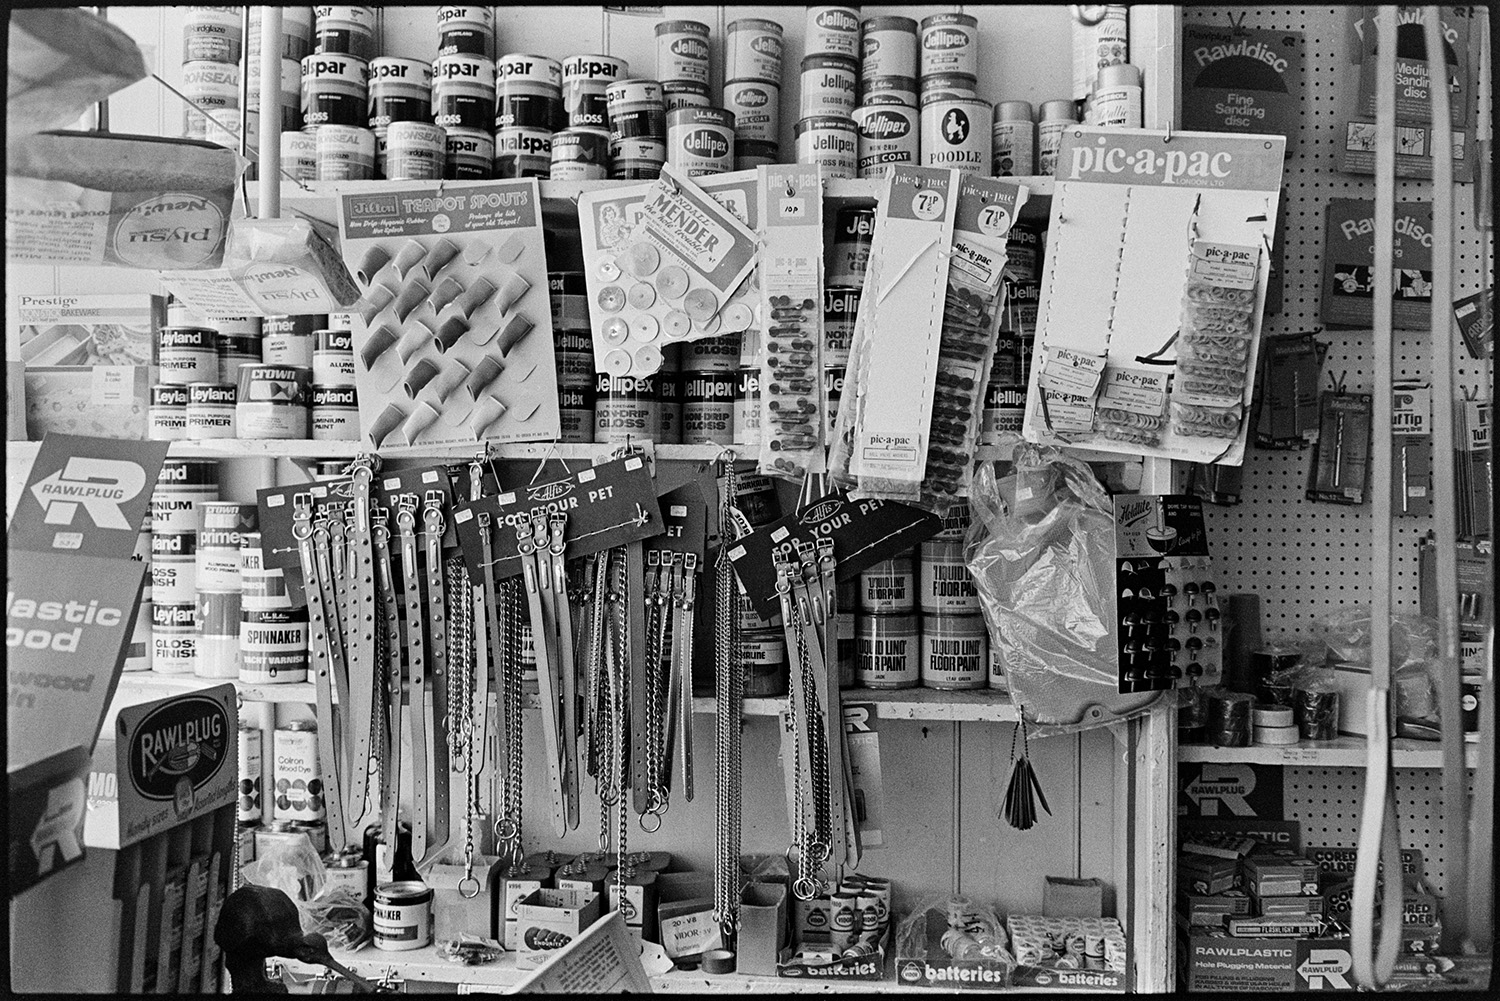 Shelves of stock, man serving paraffin with hand pump. 
[Items for sale in Eastmond's hardware shop in Torrington. Various goods are on display, including pet collars, teapot pours or spouts, tins of paint and batteries.]